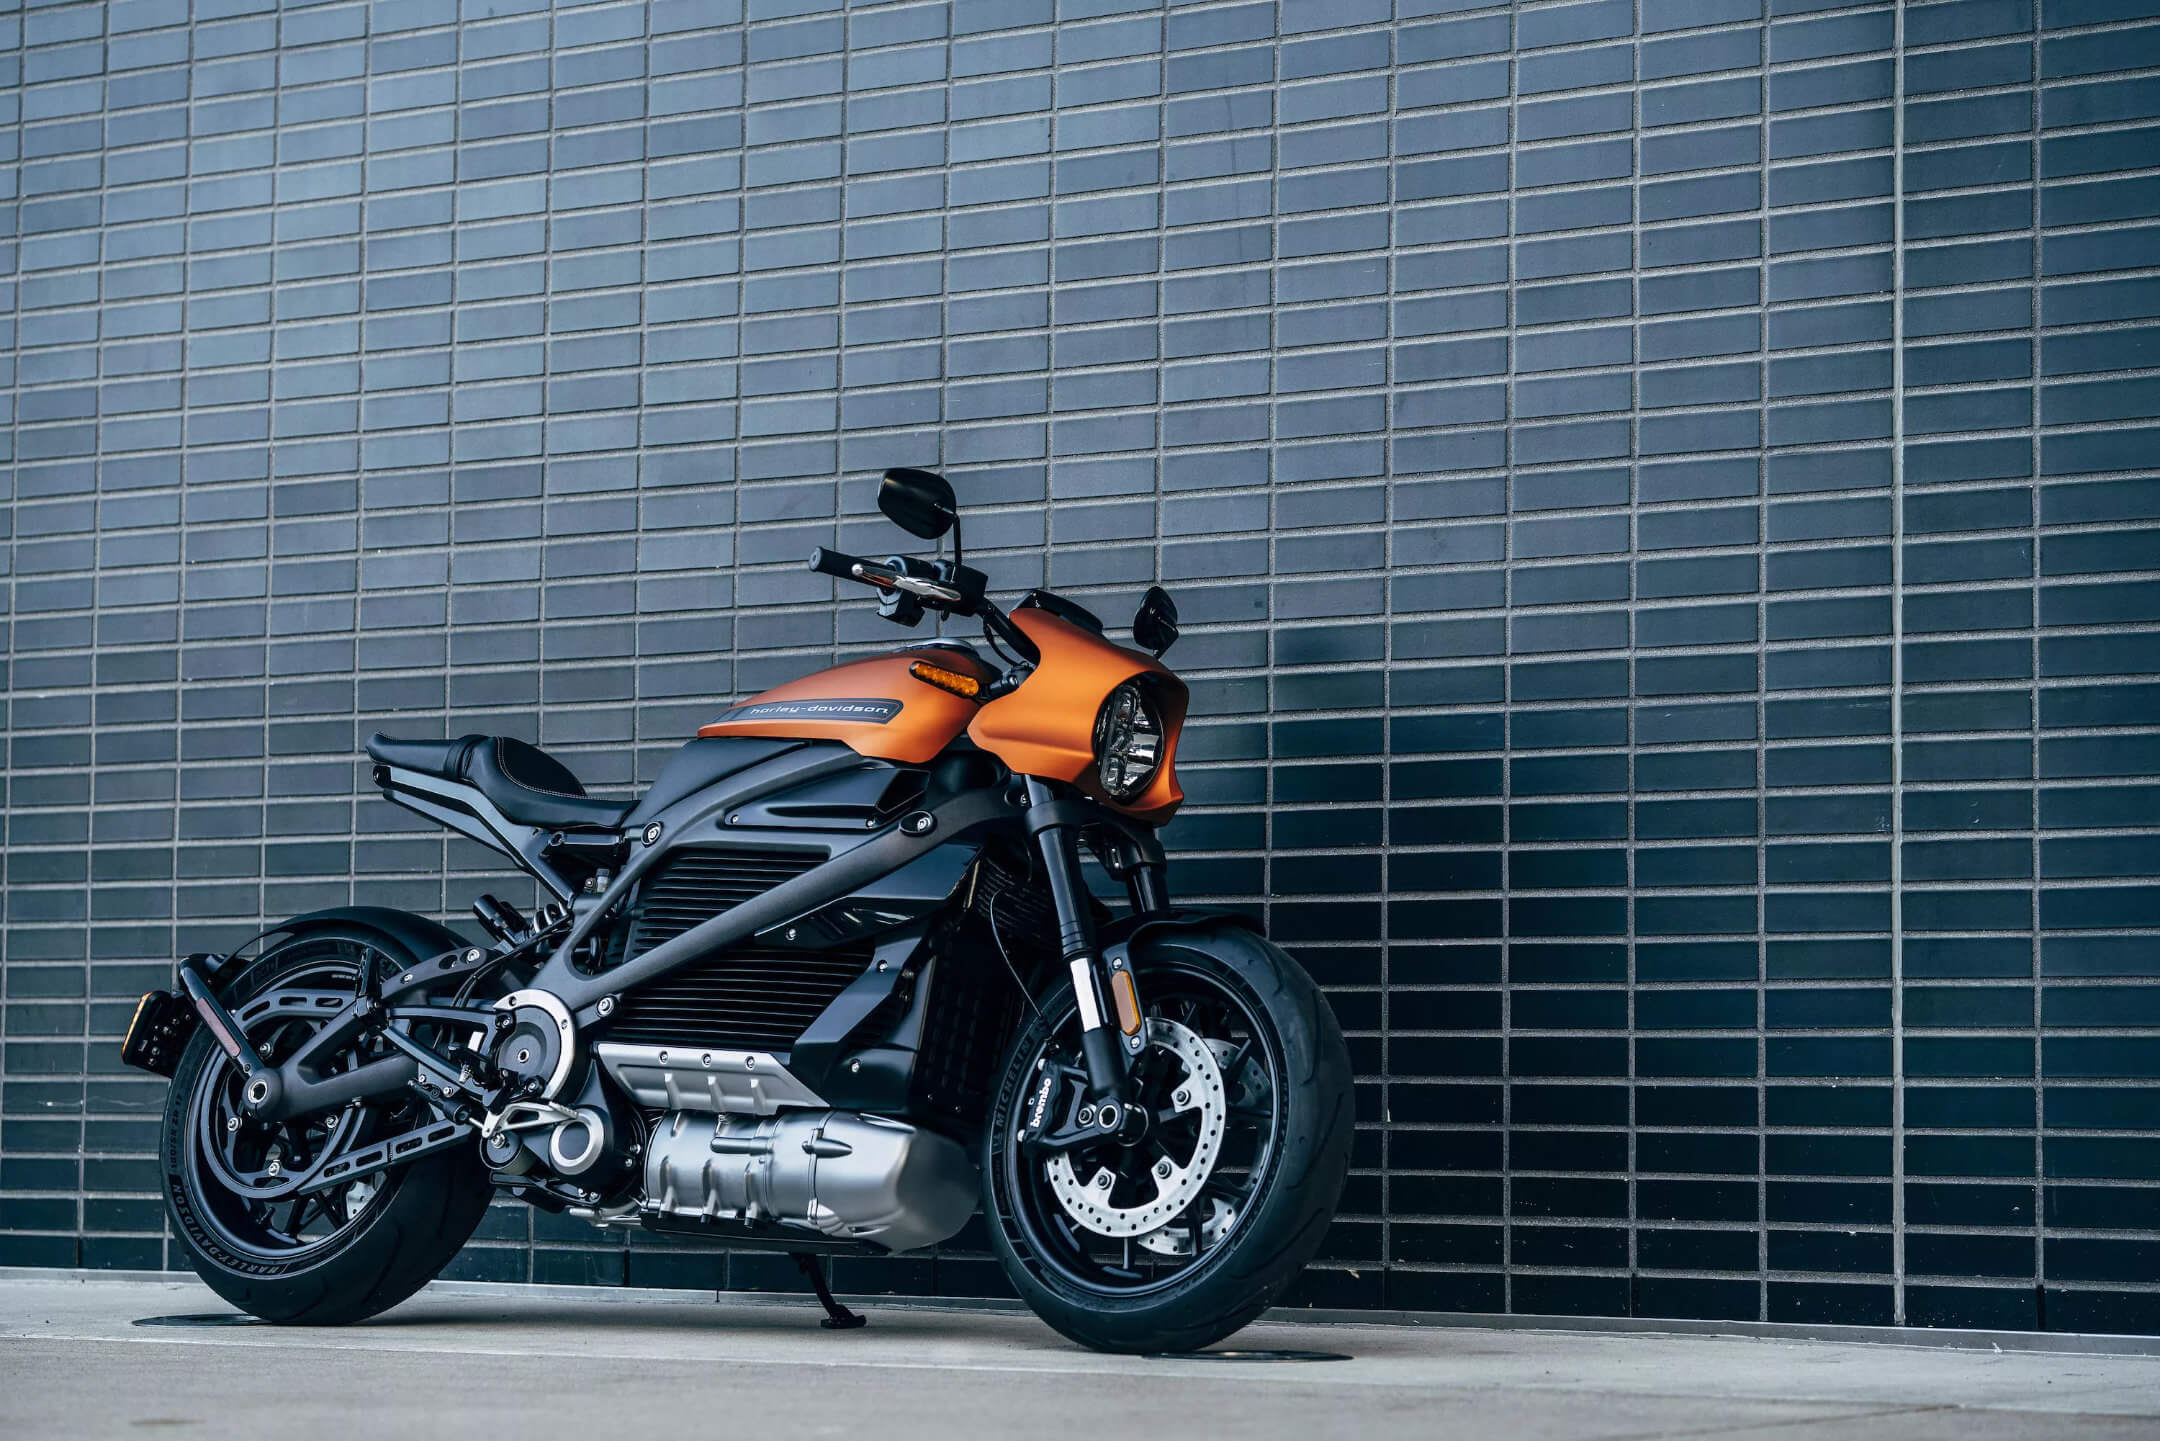 Harley-Davidson suspends production of its first-ever electric motorcycle